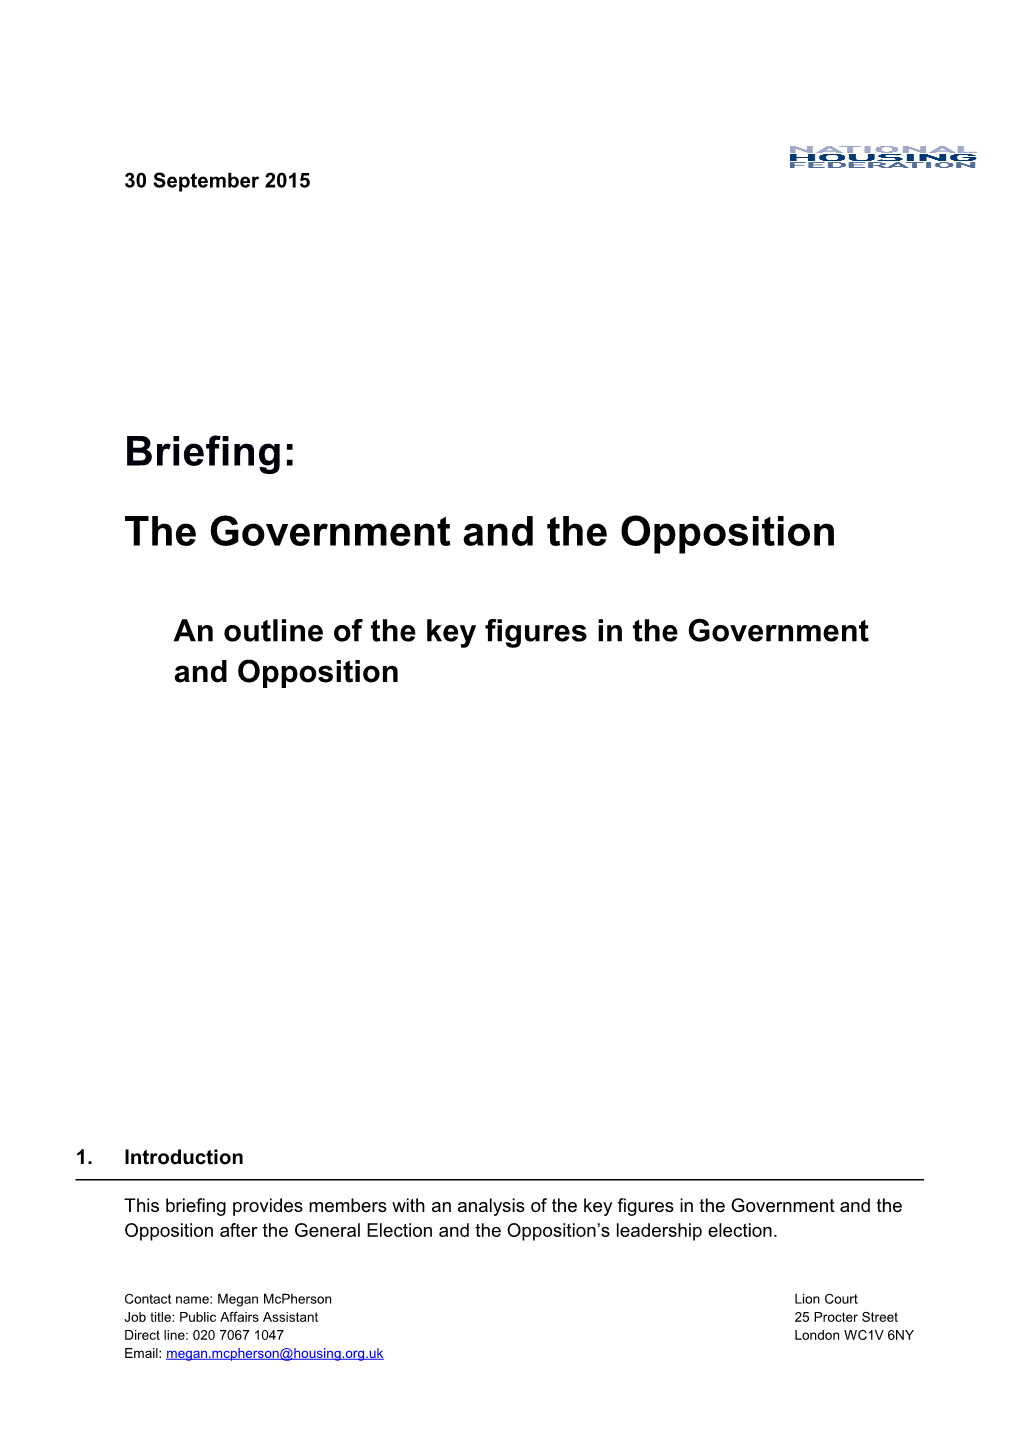 The Government and the Opposition